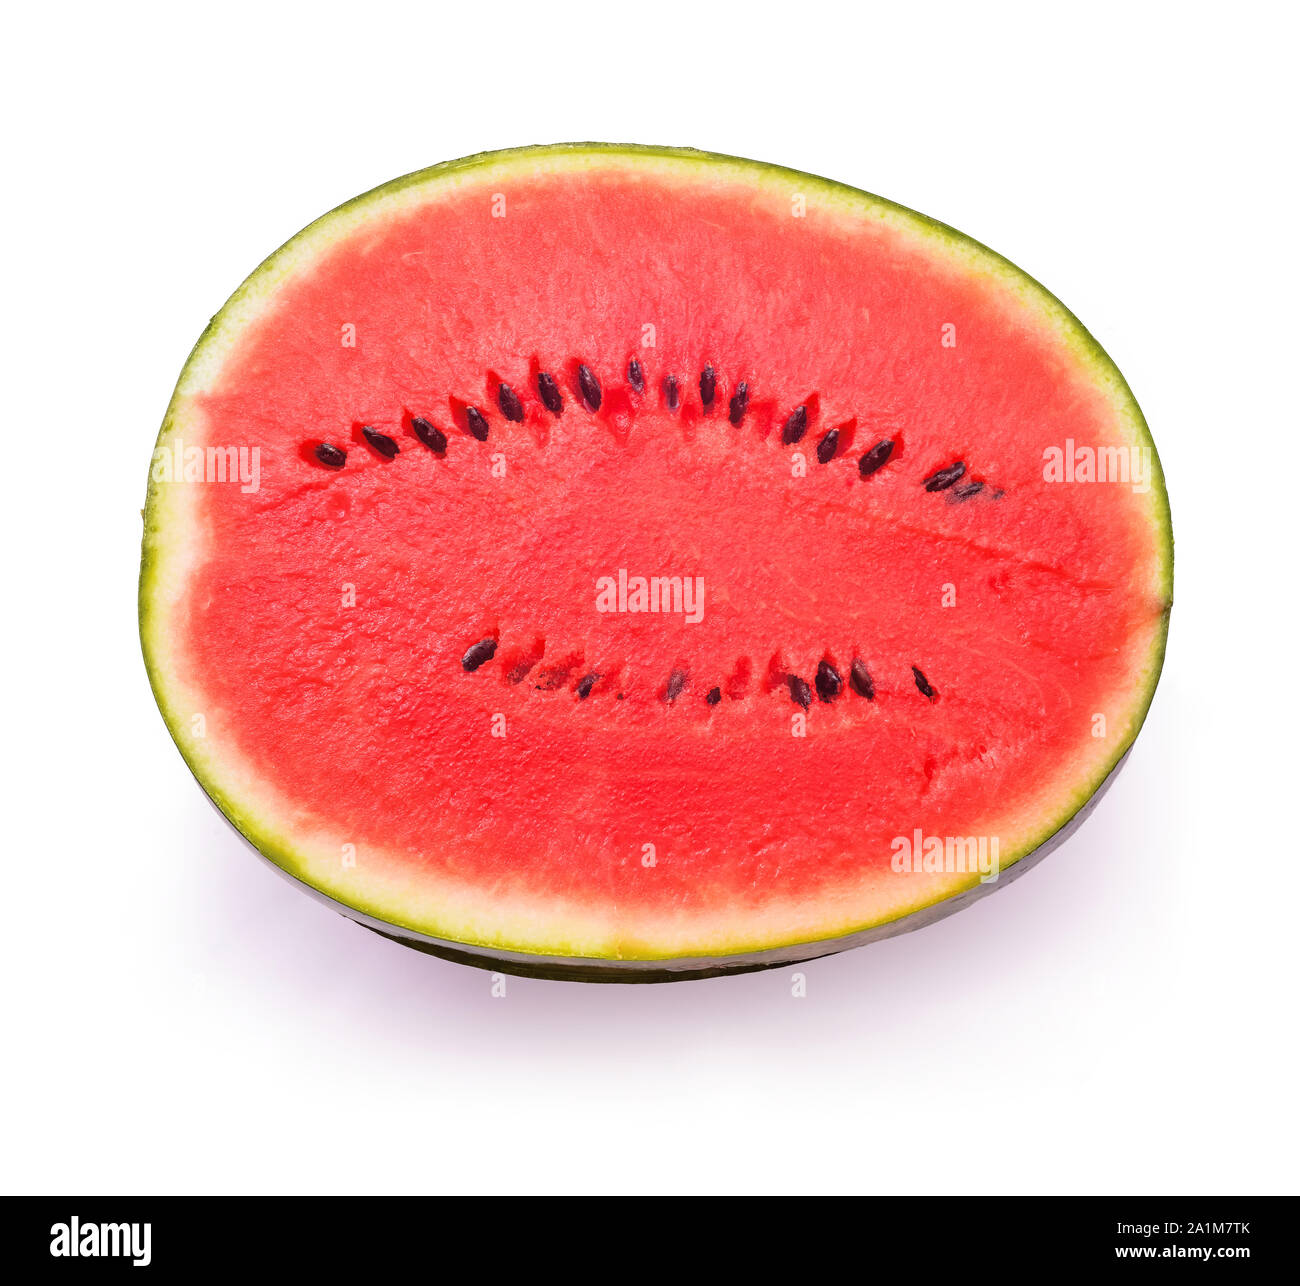 sliced watermelon half section on white background Stock Photo